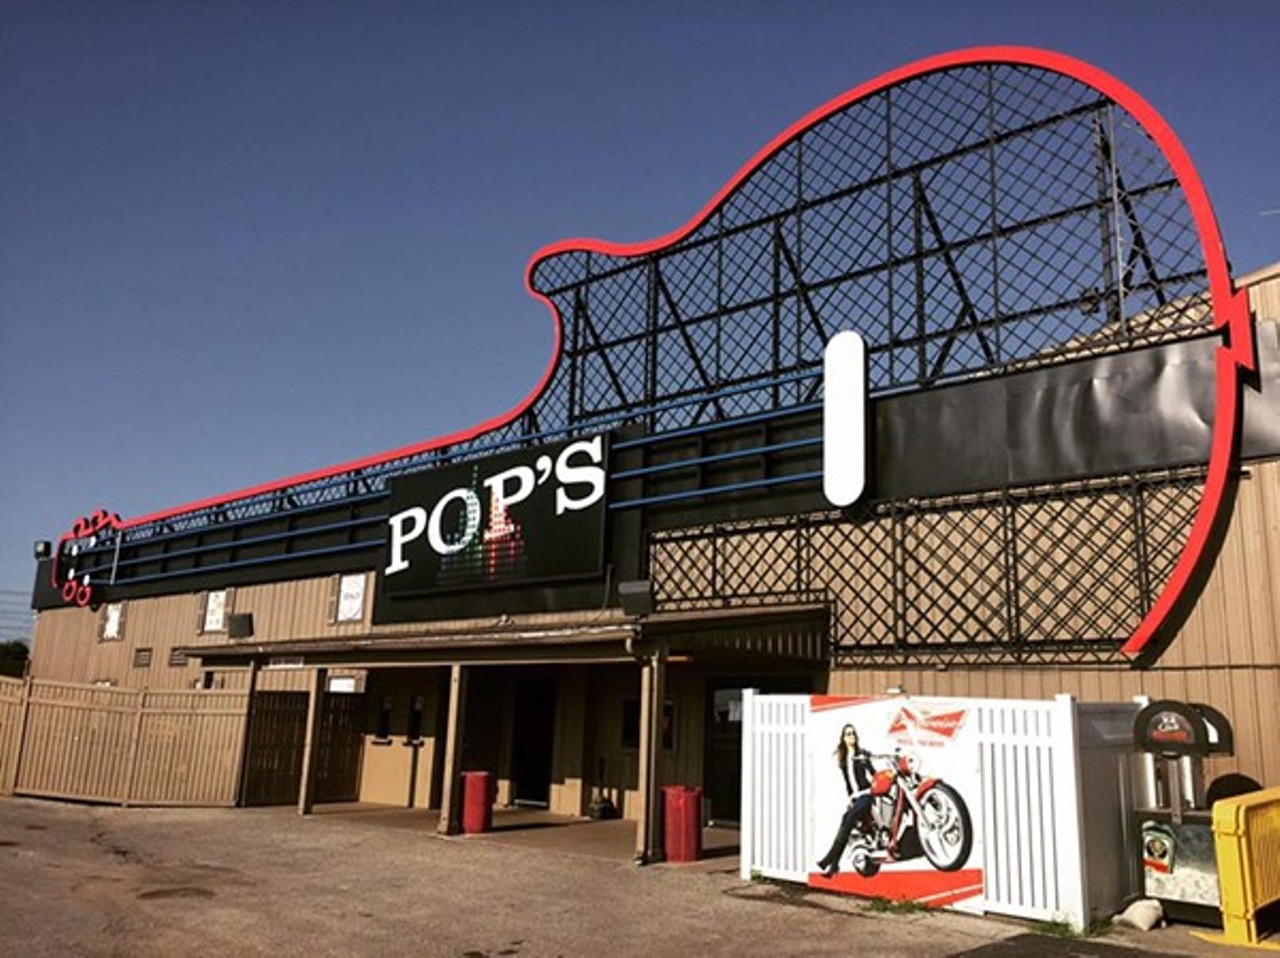  Pop's at 5 a.m.
Everyone has already hooked up that is going to hook up. And you're alone, at Pop's, at 5 a.m.